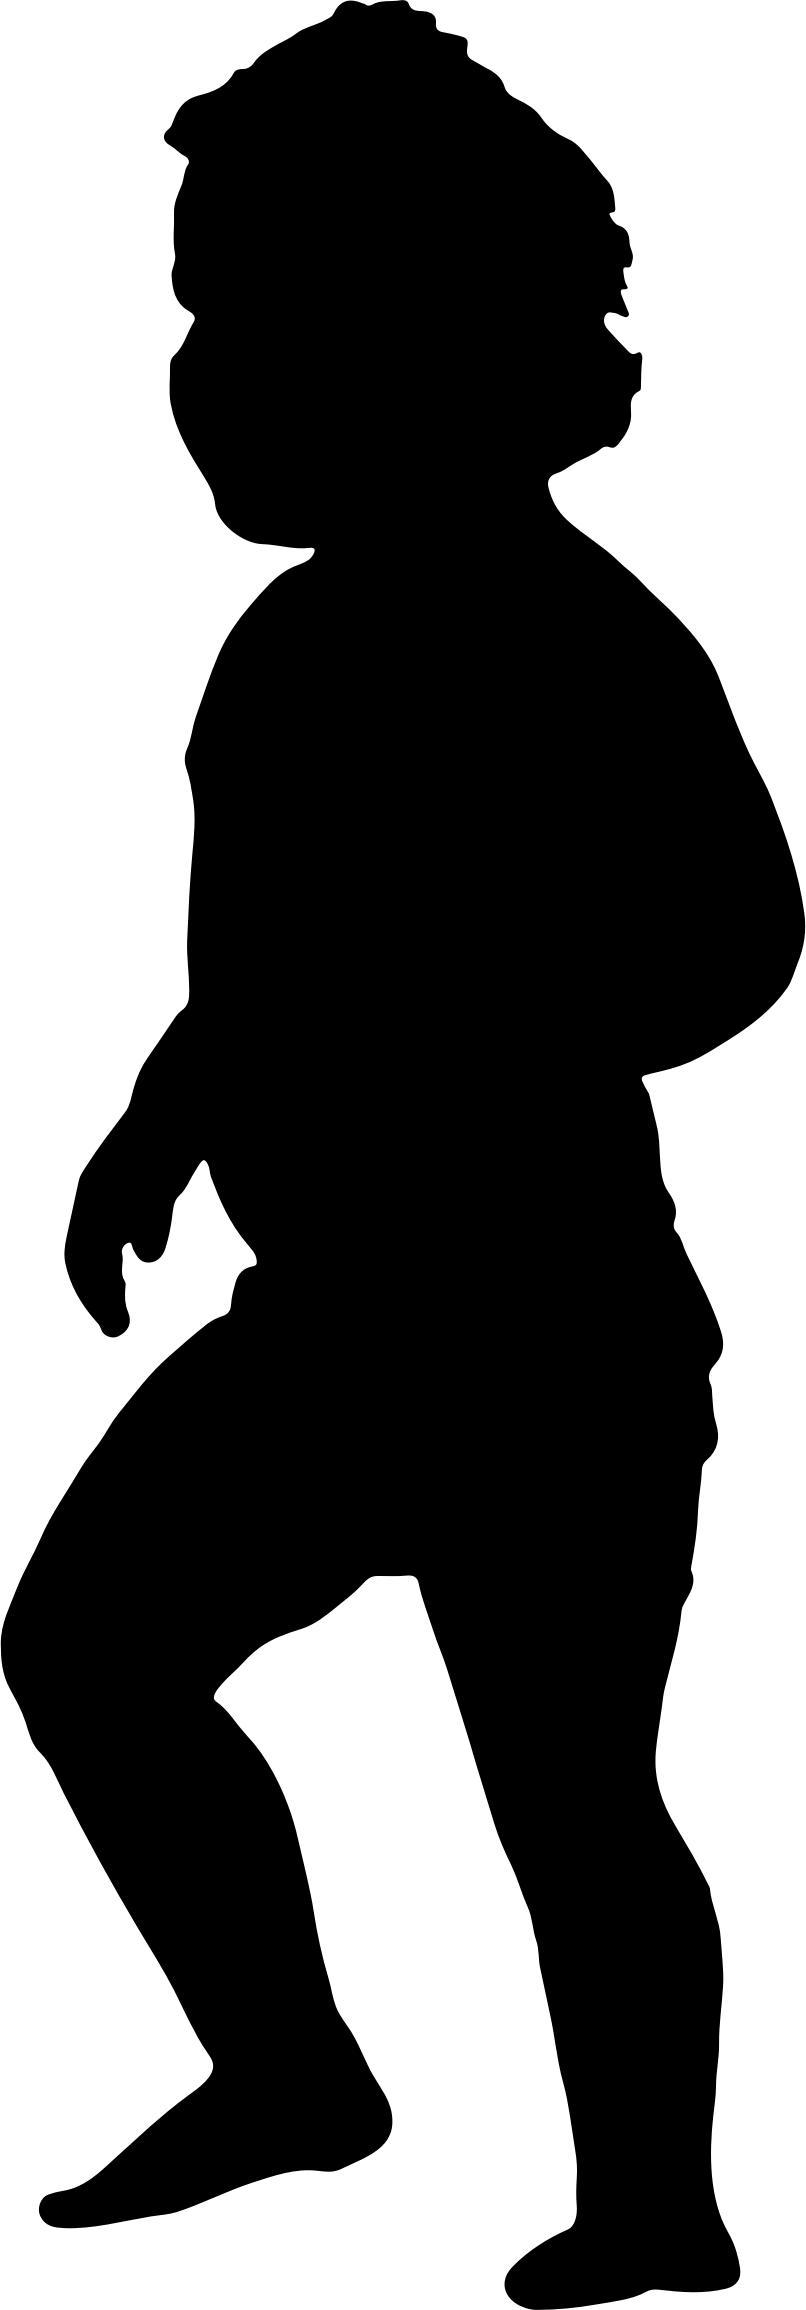 Beach Baby Silhouette png transparent